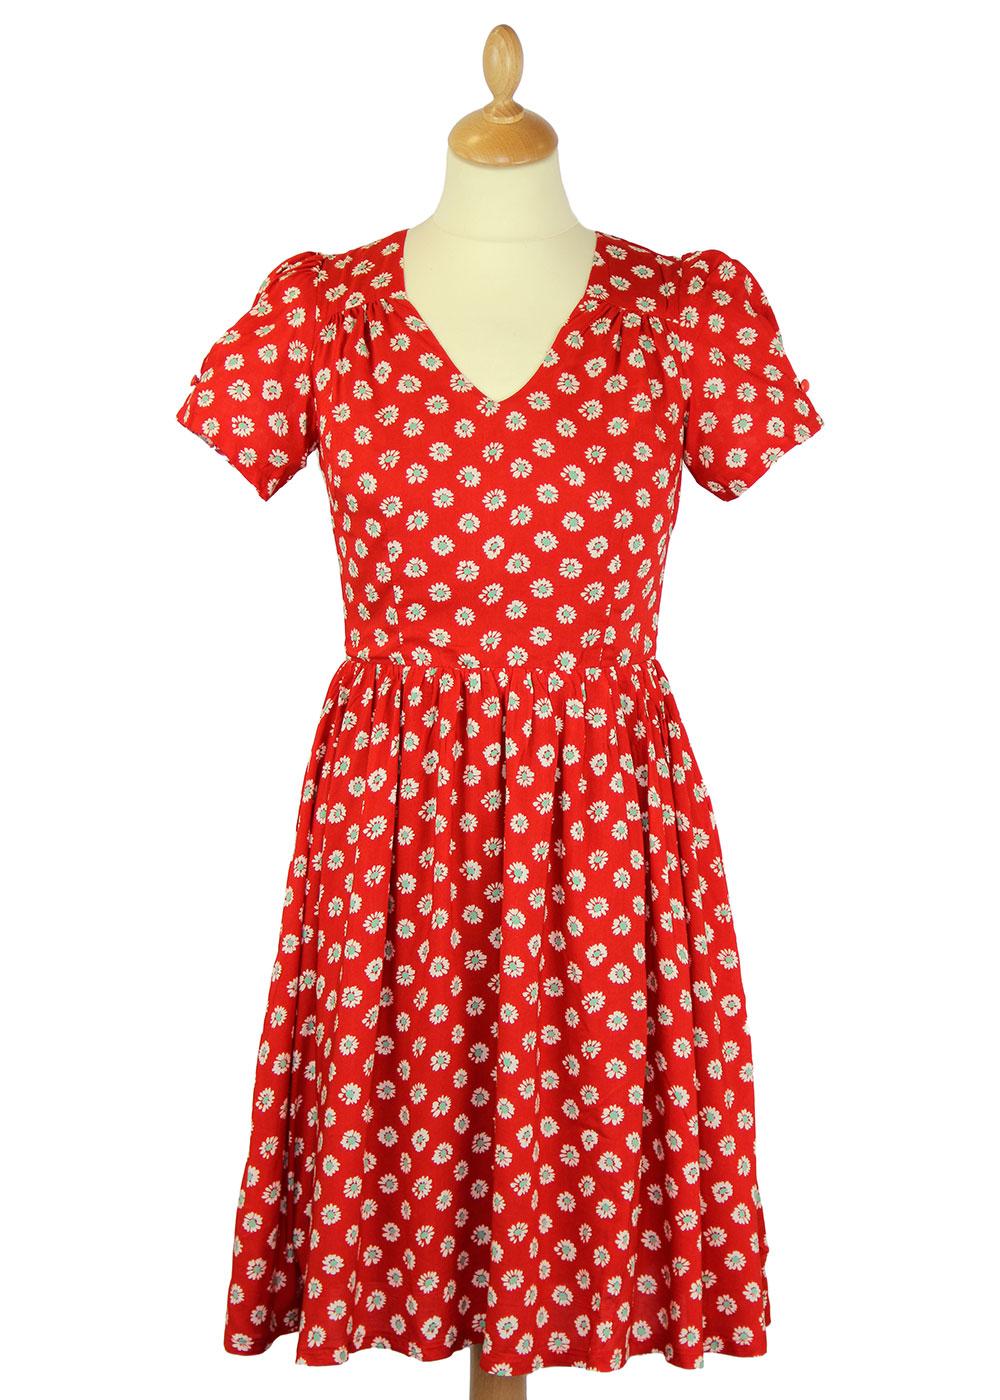 FRIDAY ON MY MIND Fleur Retro 50s Vintage Style Floral Dress Red